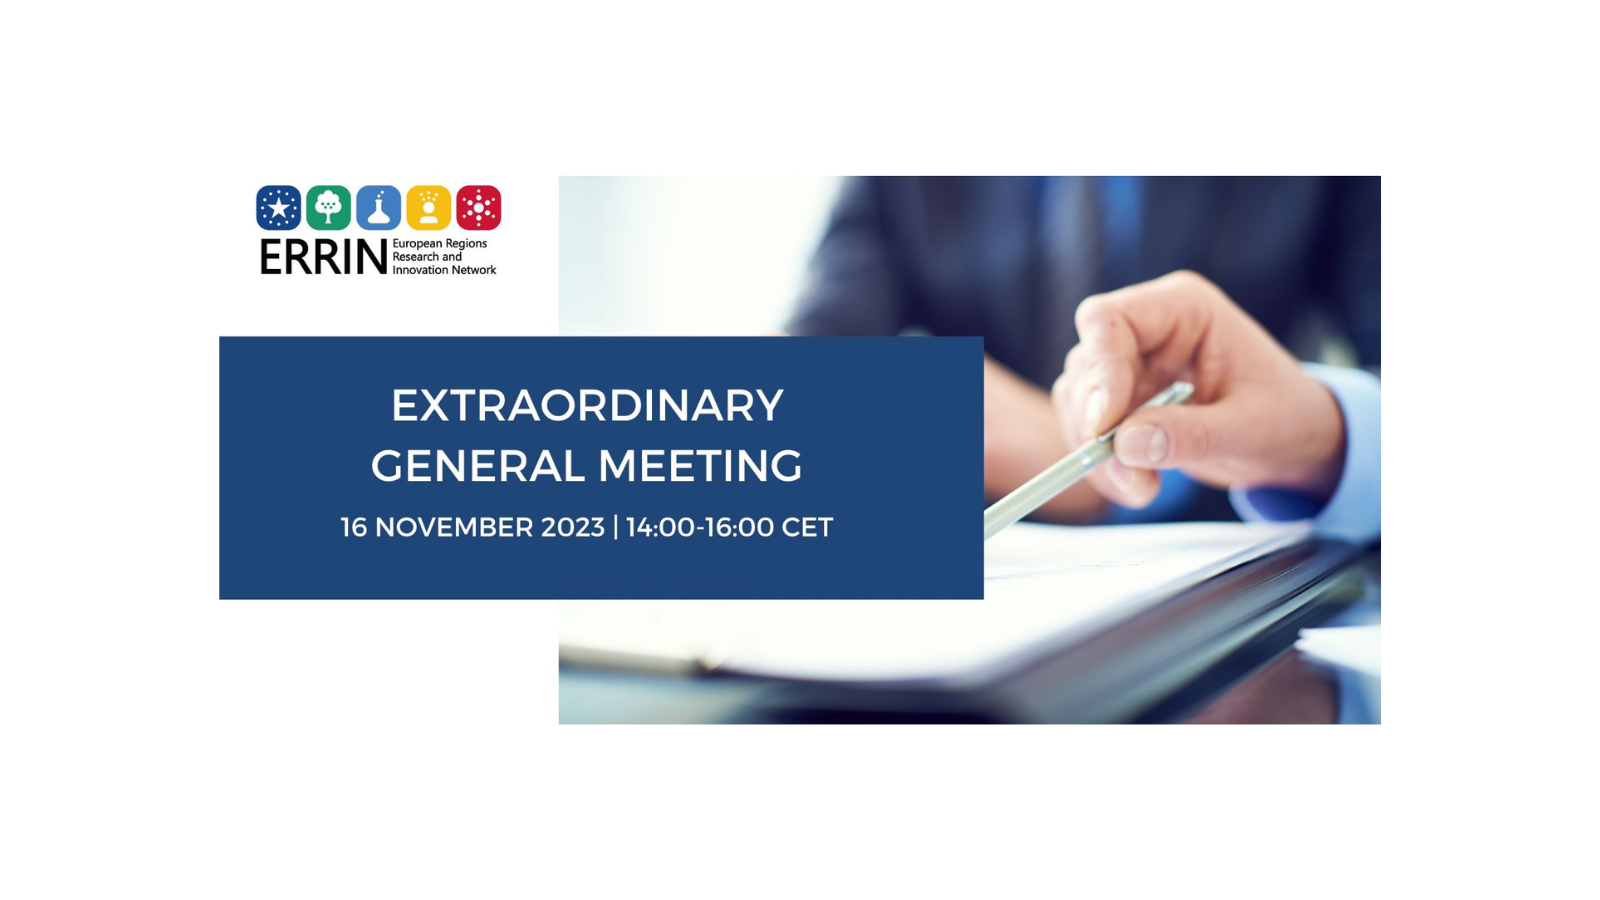 ERRIN Extraordinary General Meeting on 16 November 2023 – important announcement for members